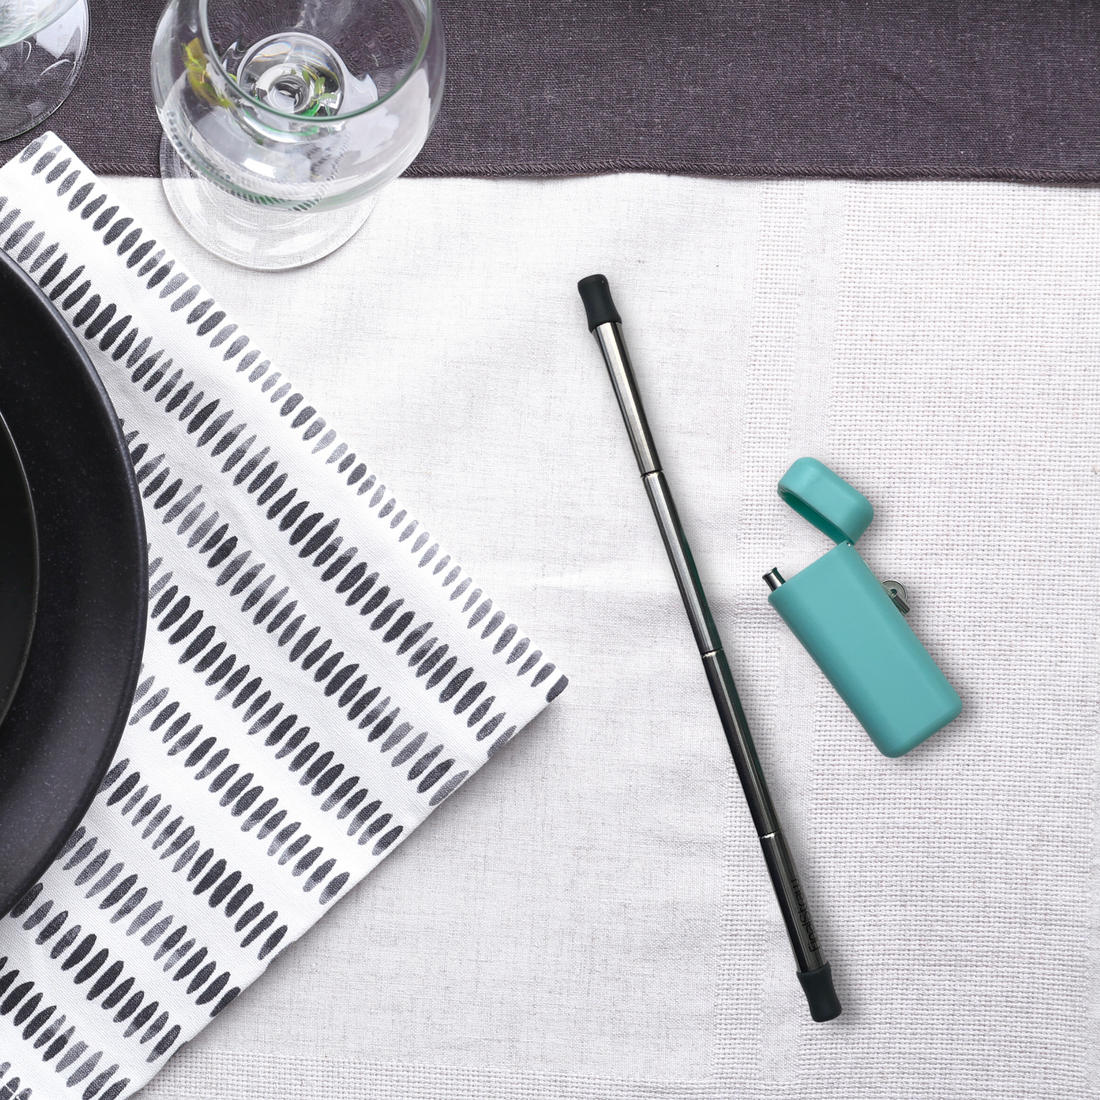 Final Straw At Place Setting With Sea Tur-Teal Case.